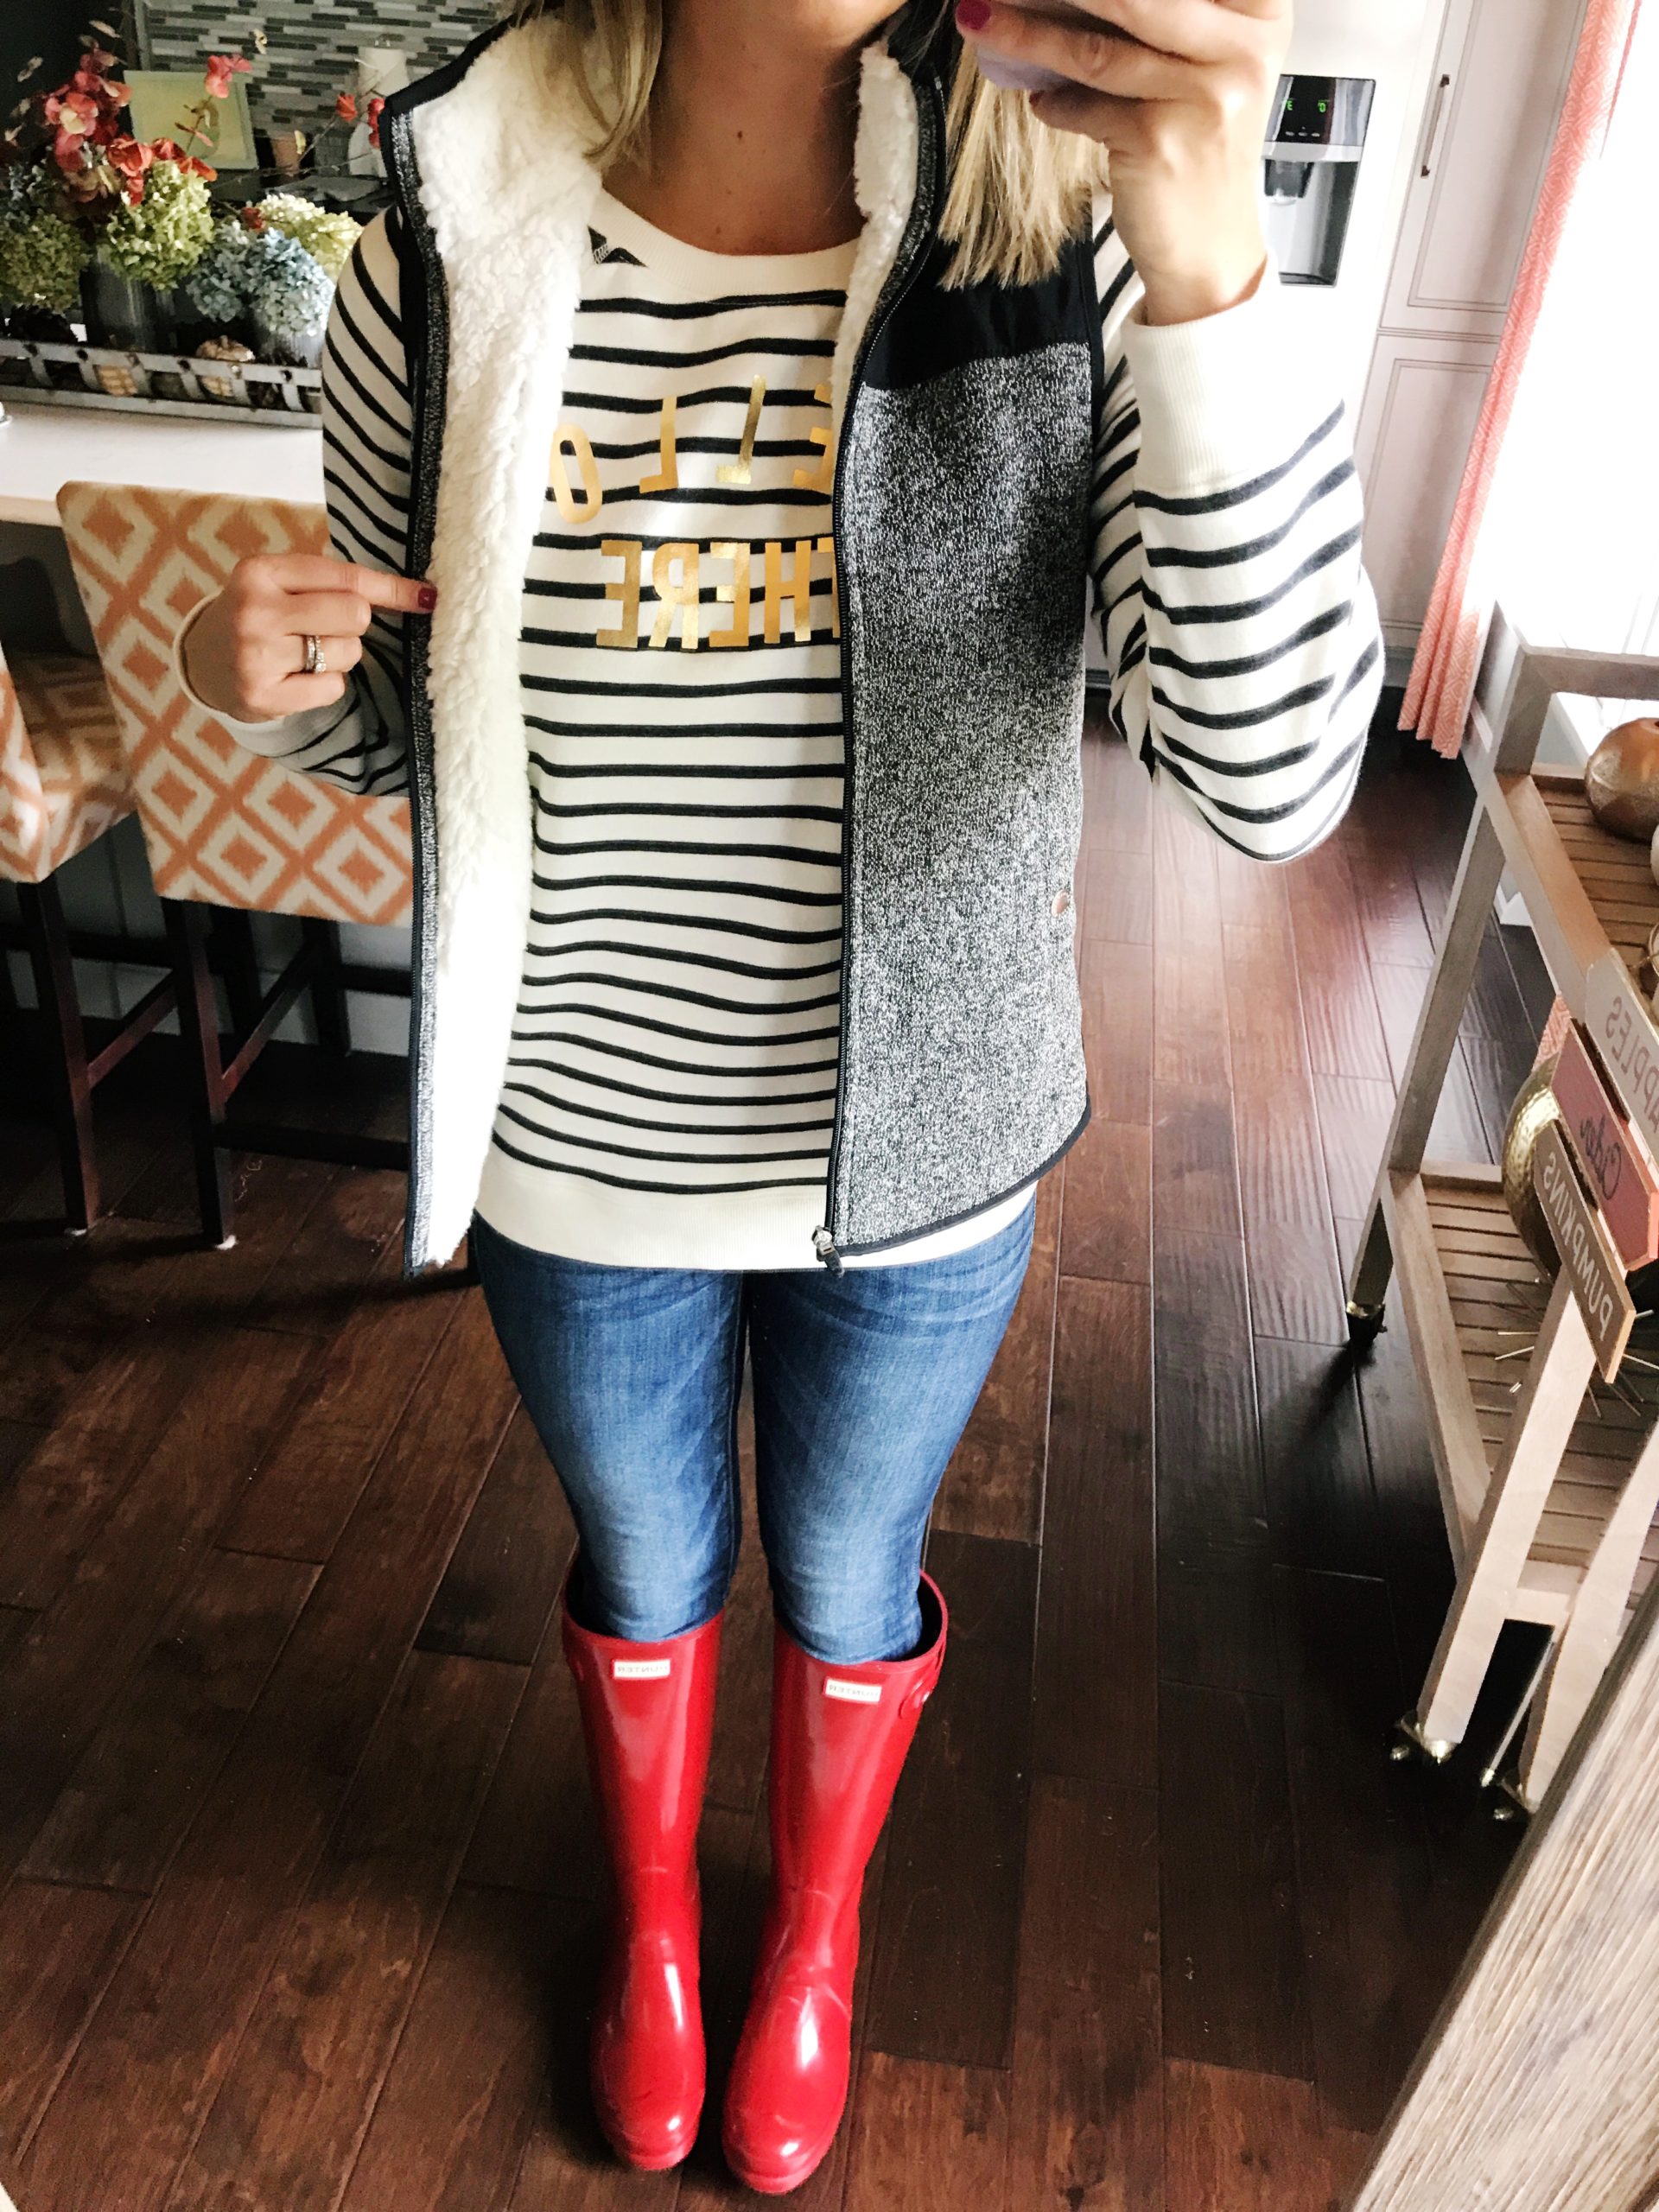 Rainy Fall Day Outfit